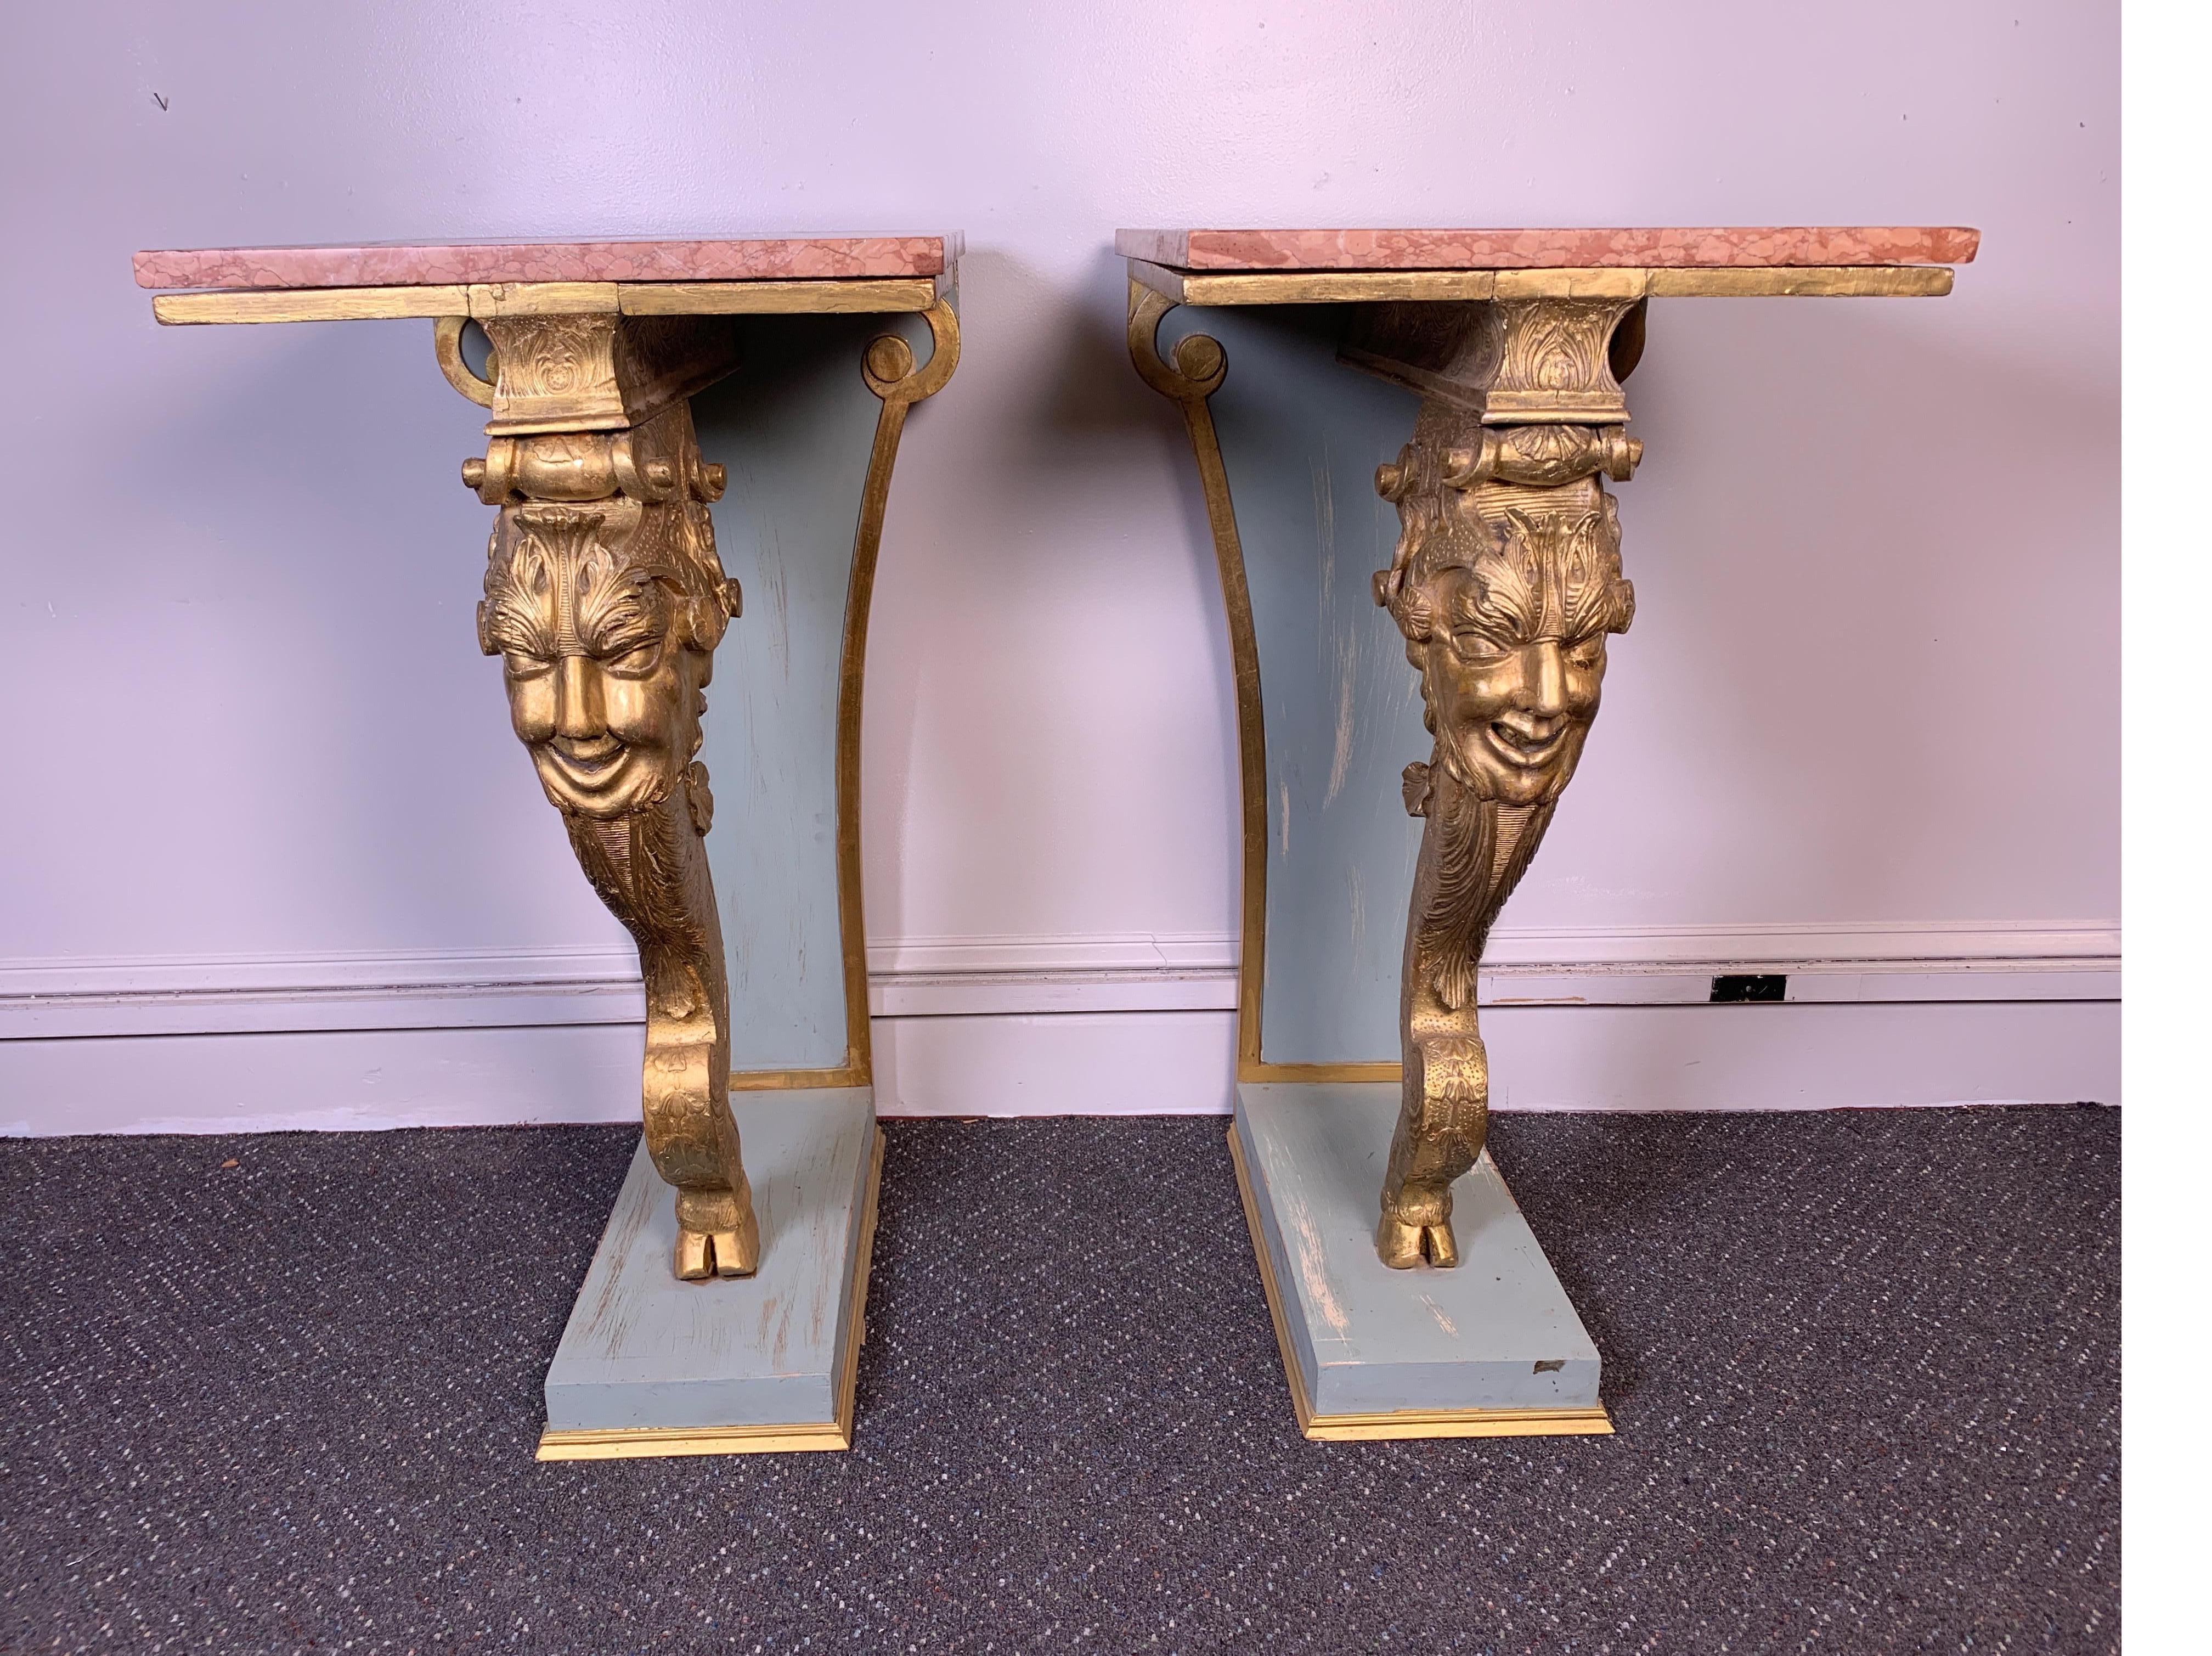 Italian pair of carved wood gilt pedestals with marble top, circa 19th century
Nice pair of antique pedestals that can also be used as a console with a longer piece of marble.
Dimensions: 18.5